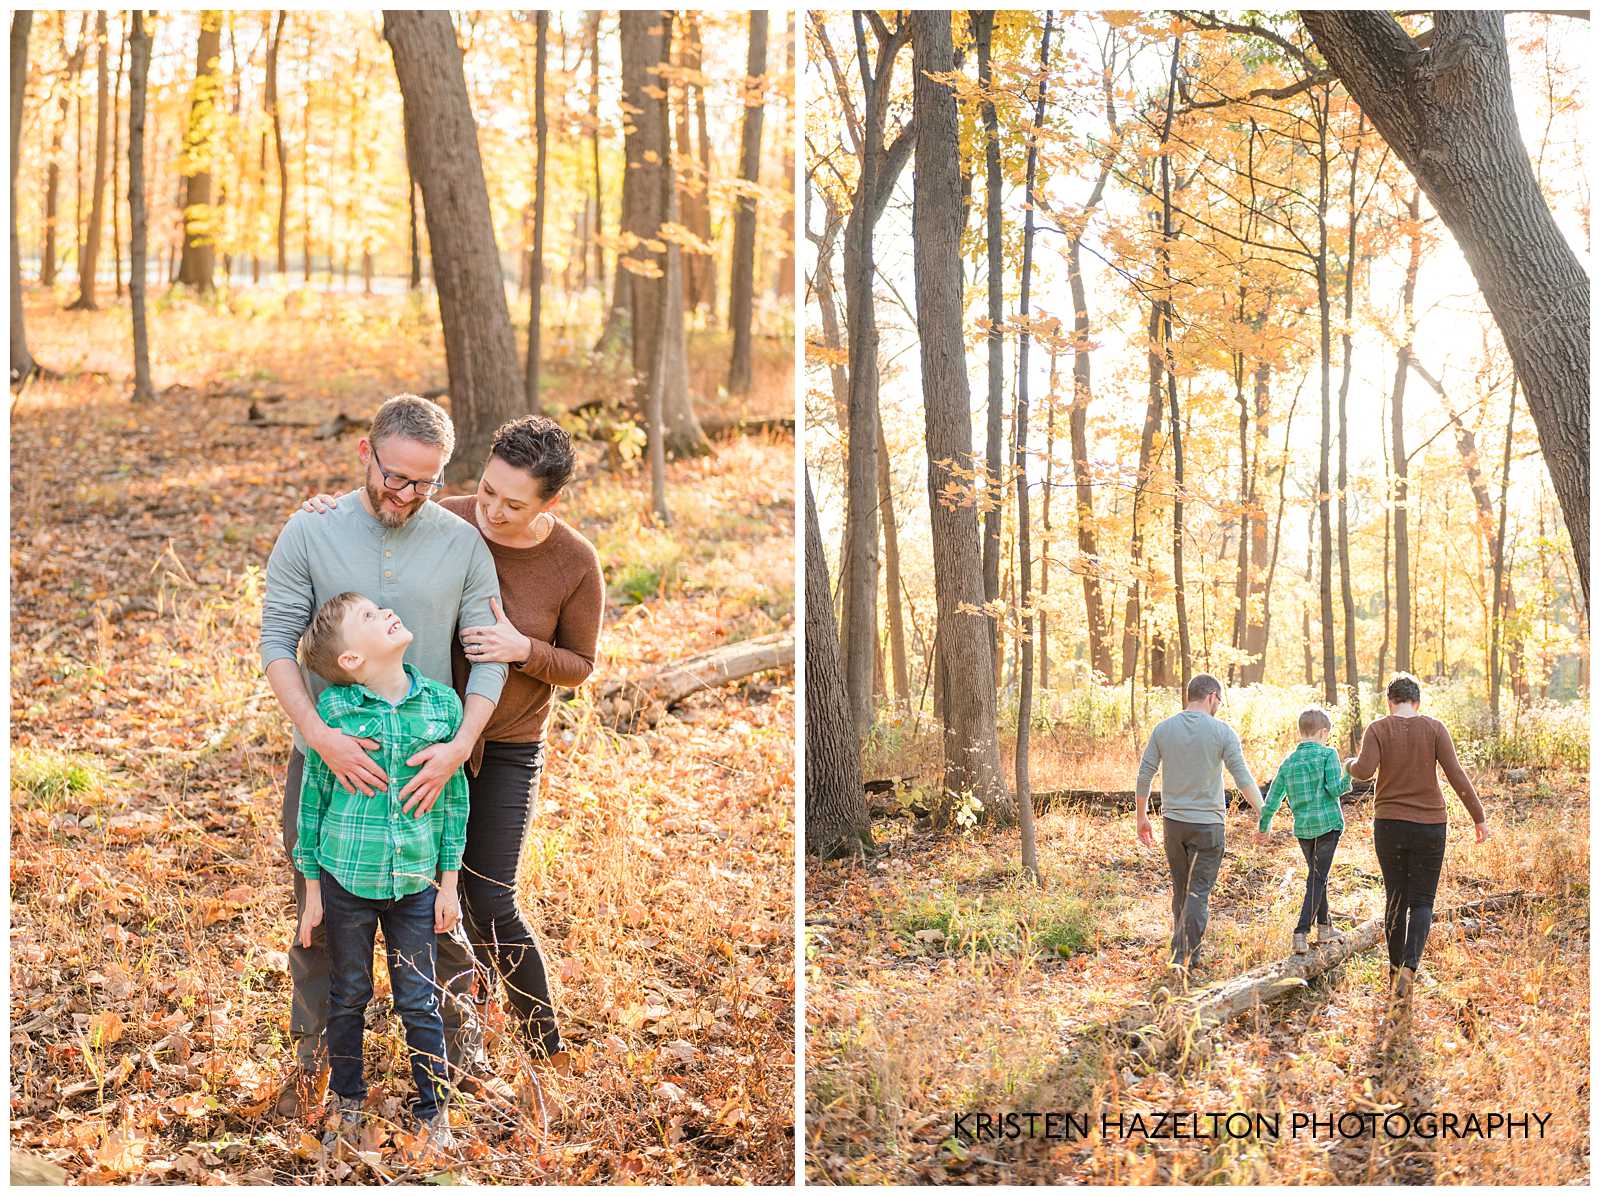 Mom and Dad holding son's hands as he walks on a log